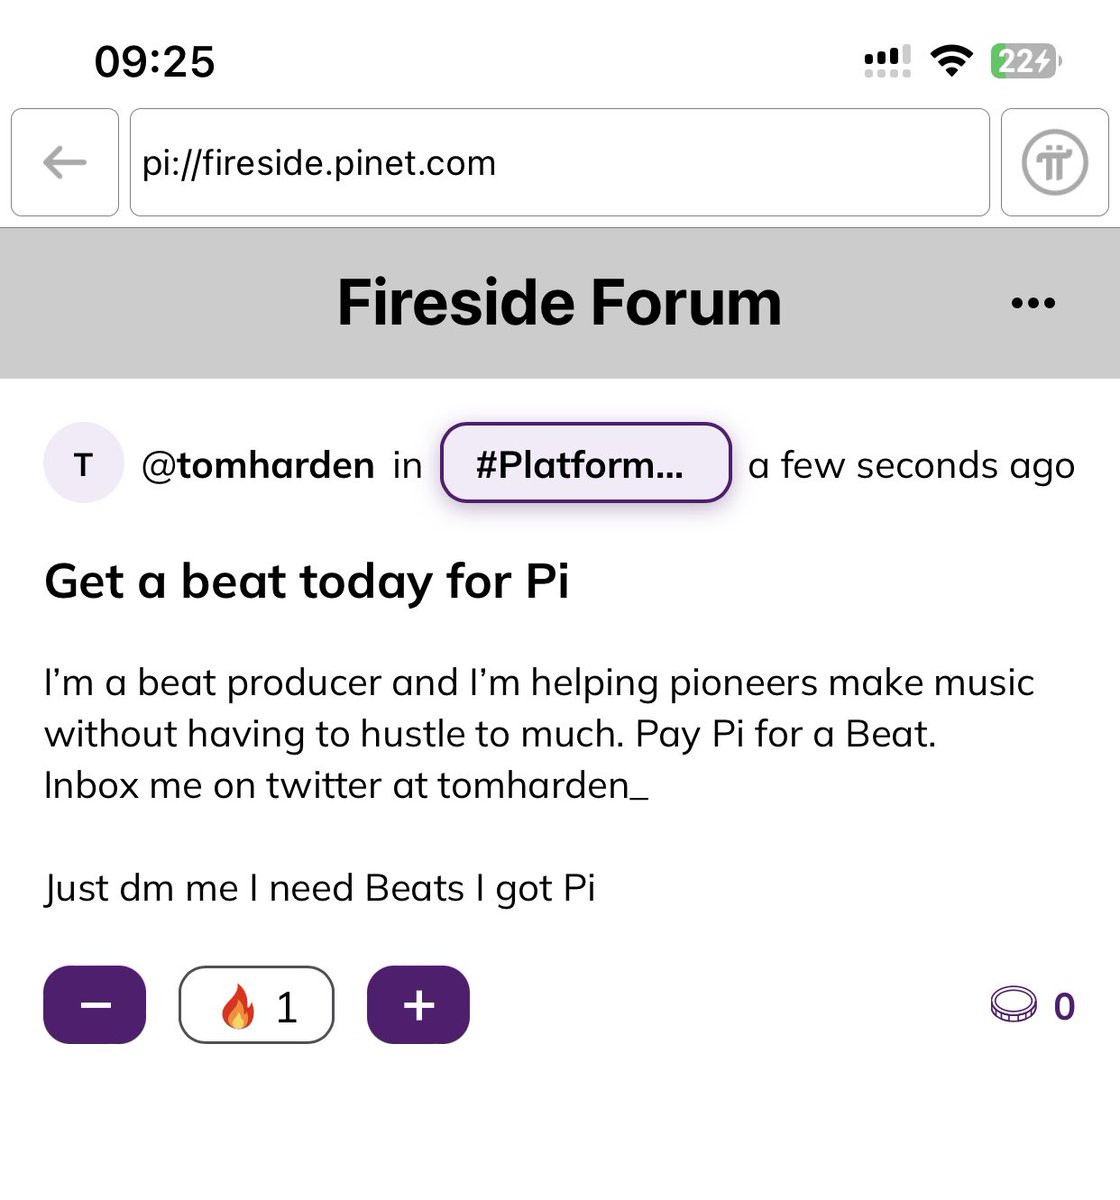 I’m making a public notice today… 

I’ll create your beats for your music, podcasts, tv shows and more for Pi. 

T&C Apply. 

@pizzashoem1 @Edwin2199 @BongoIdeas @JoeydePukka @dorisyincpa 
#piNetwork #PiPayment #PiMainnet #WWDC23 #FiresideForum @pichainmall @PiCoreTeam